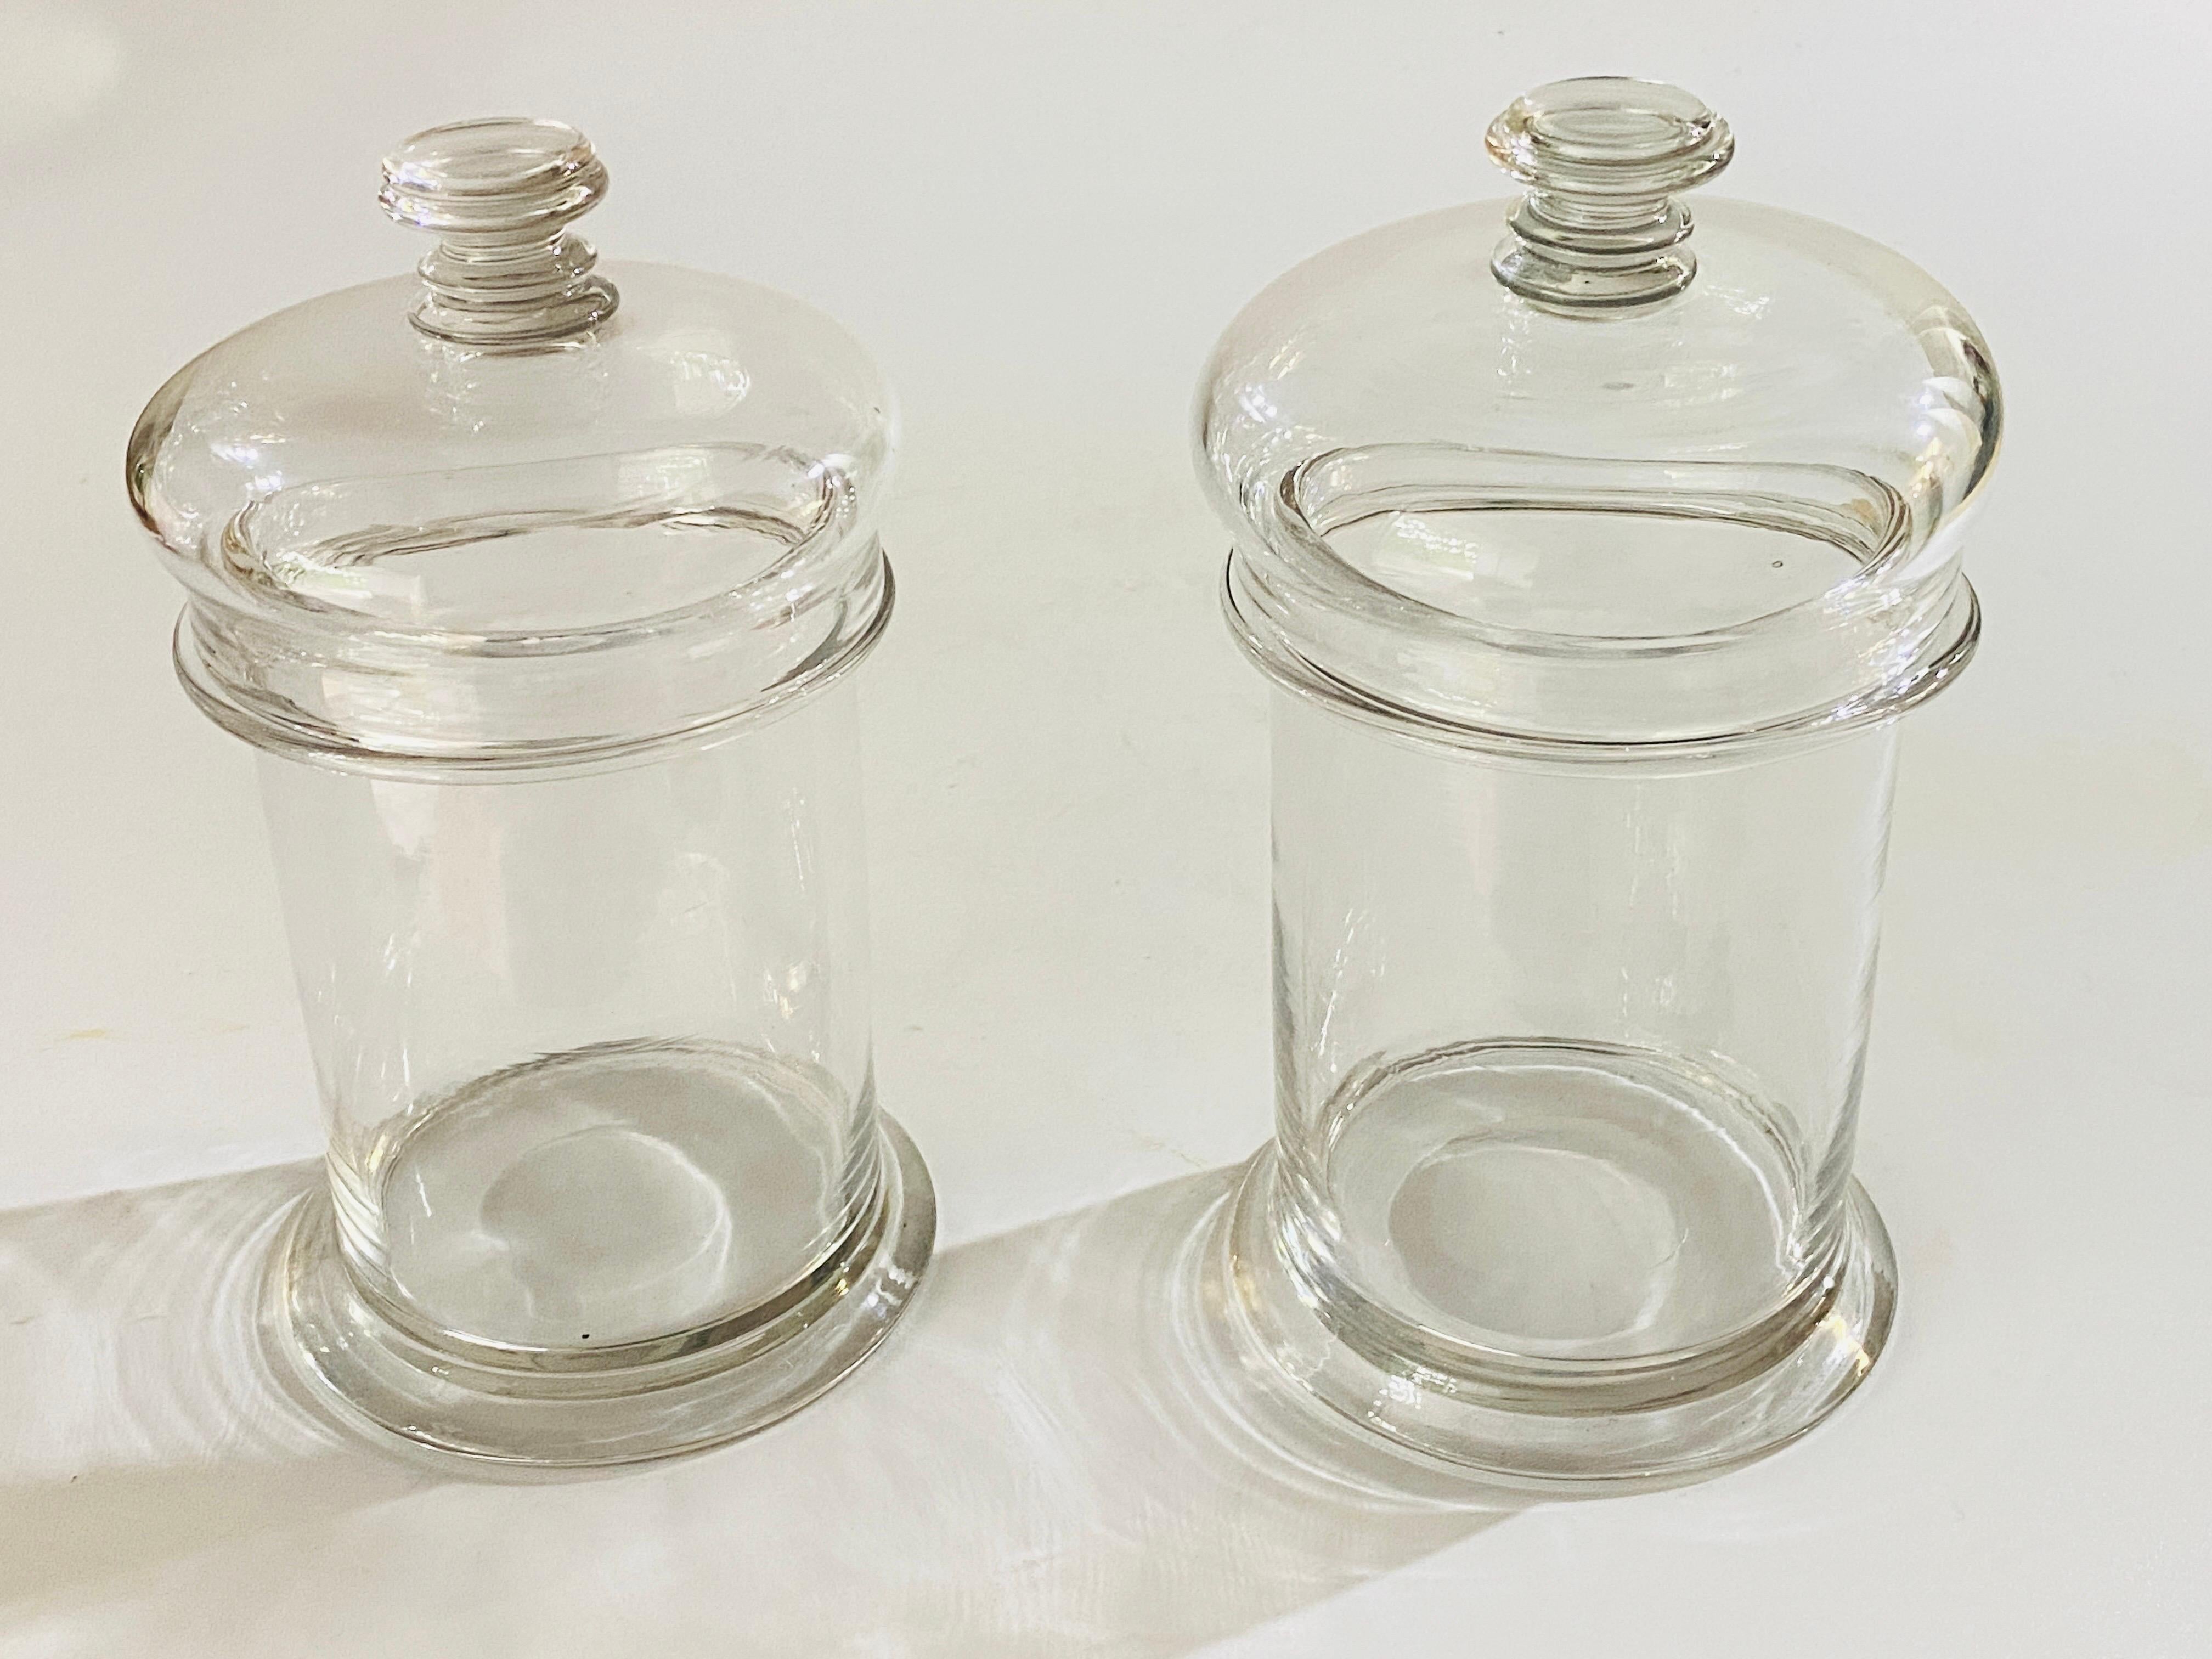 Glass Pot with a Lid Box or Bottle, Transparent Color, France, circa 1960 For Sale 2